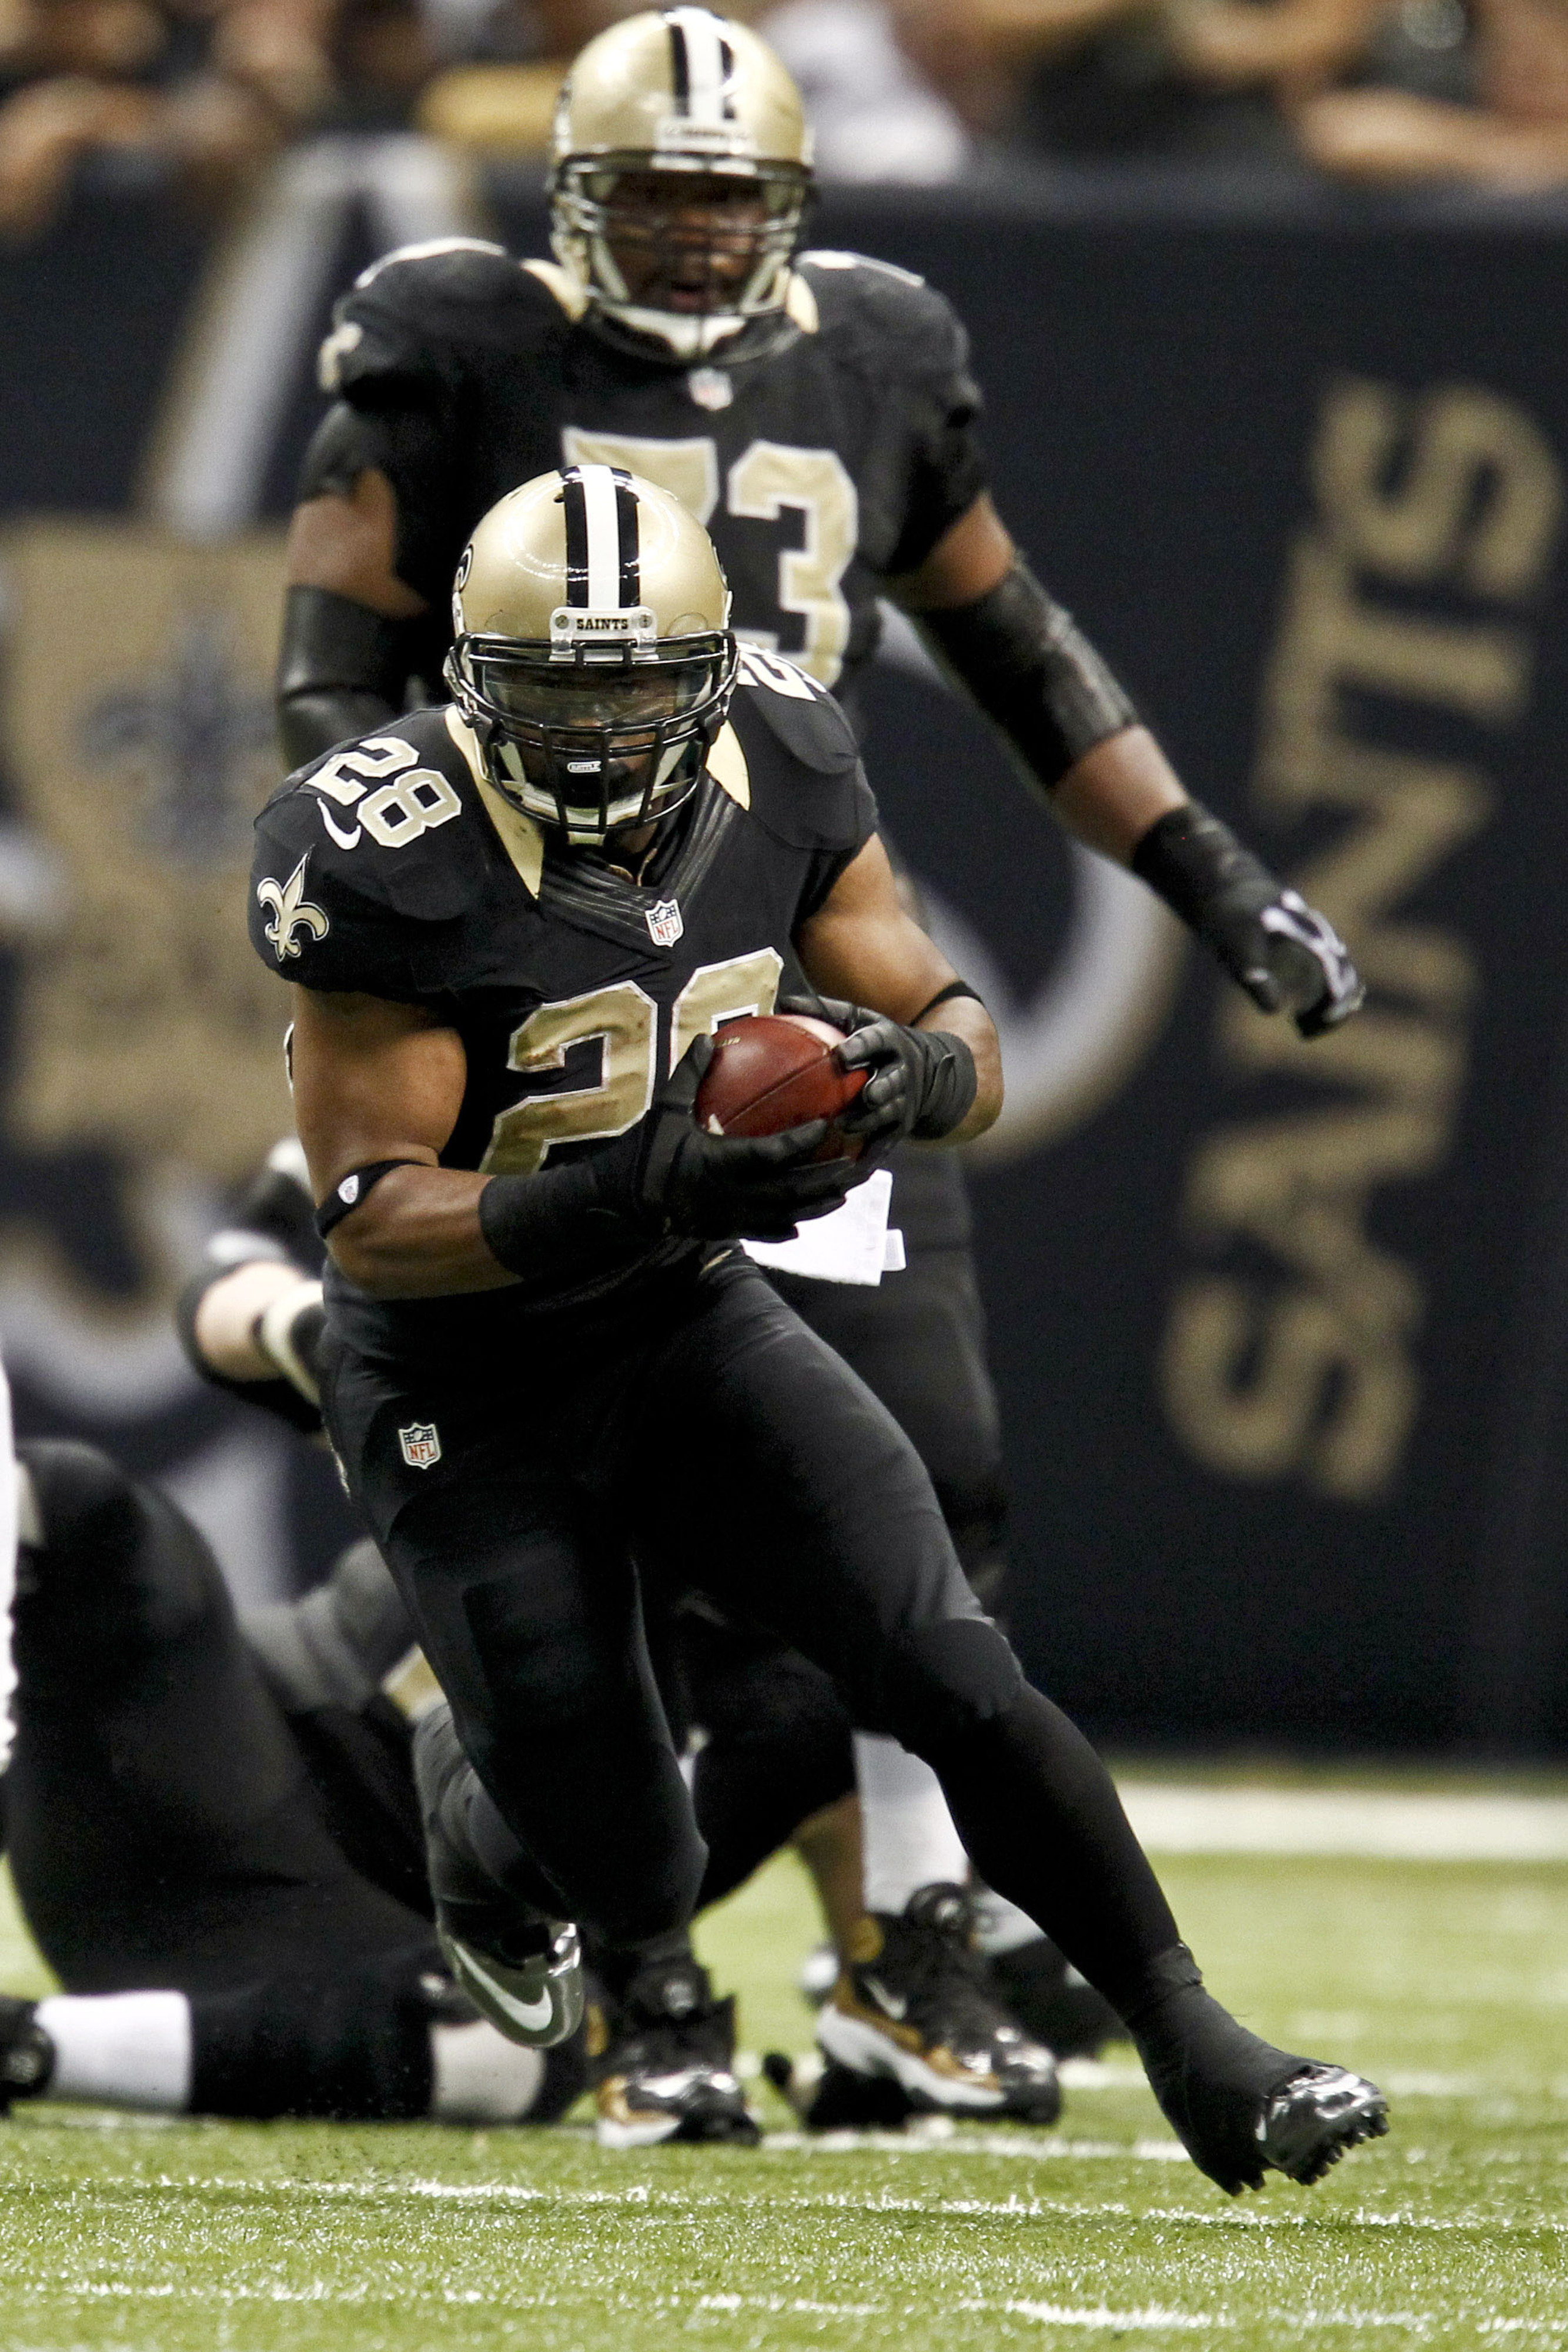 Mark Ingram and the running game have done well so far.